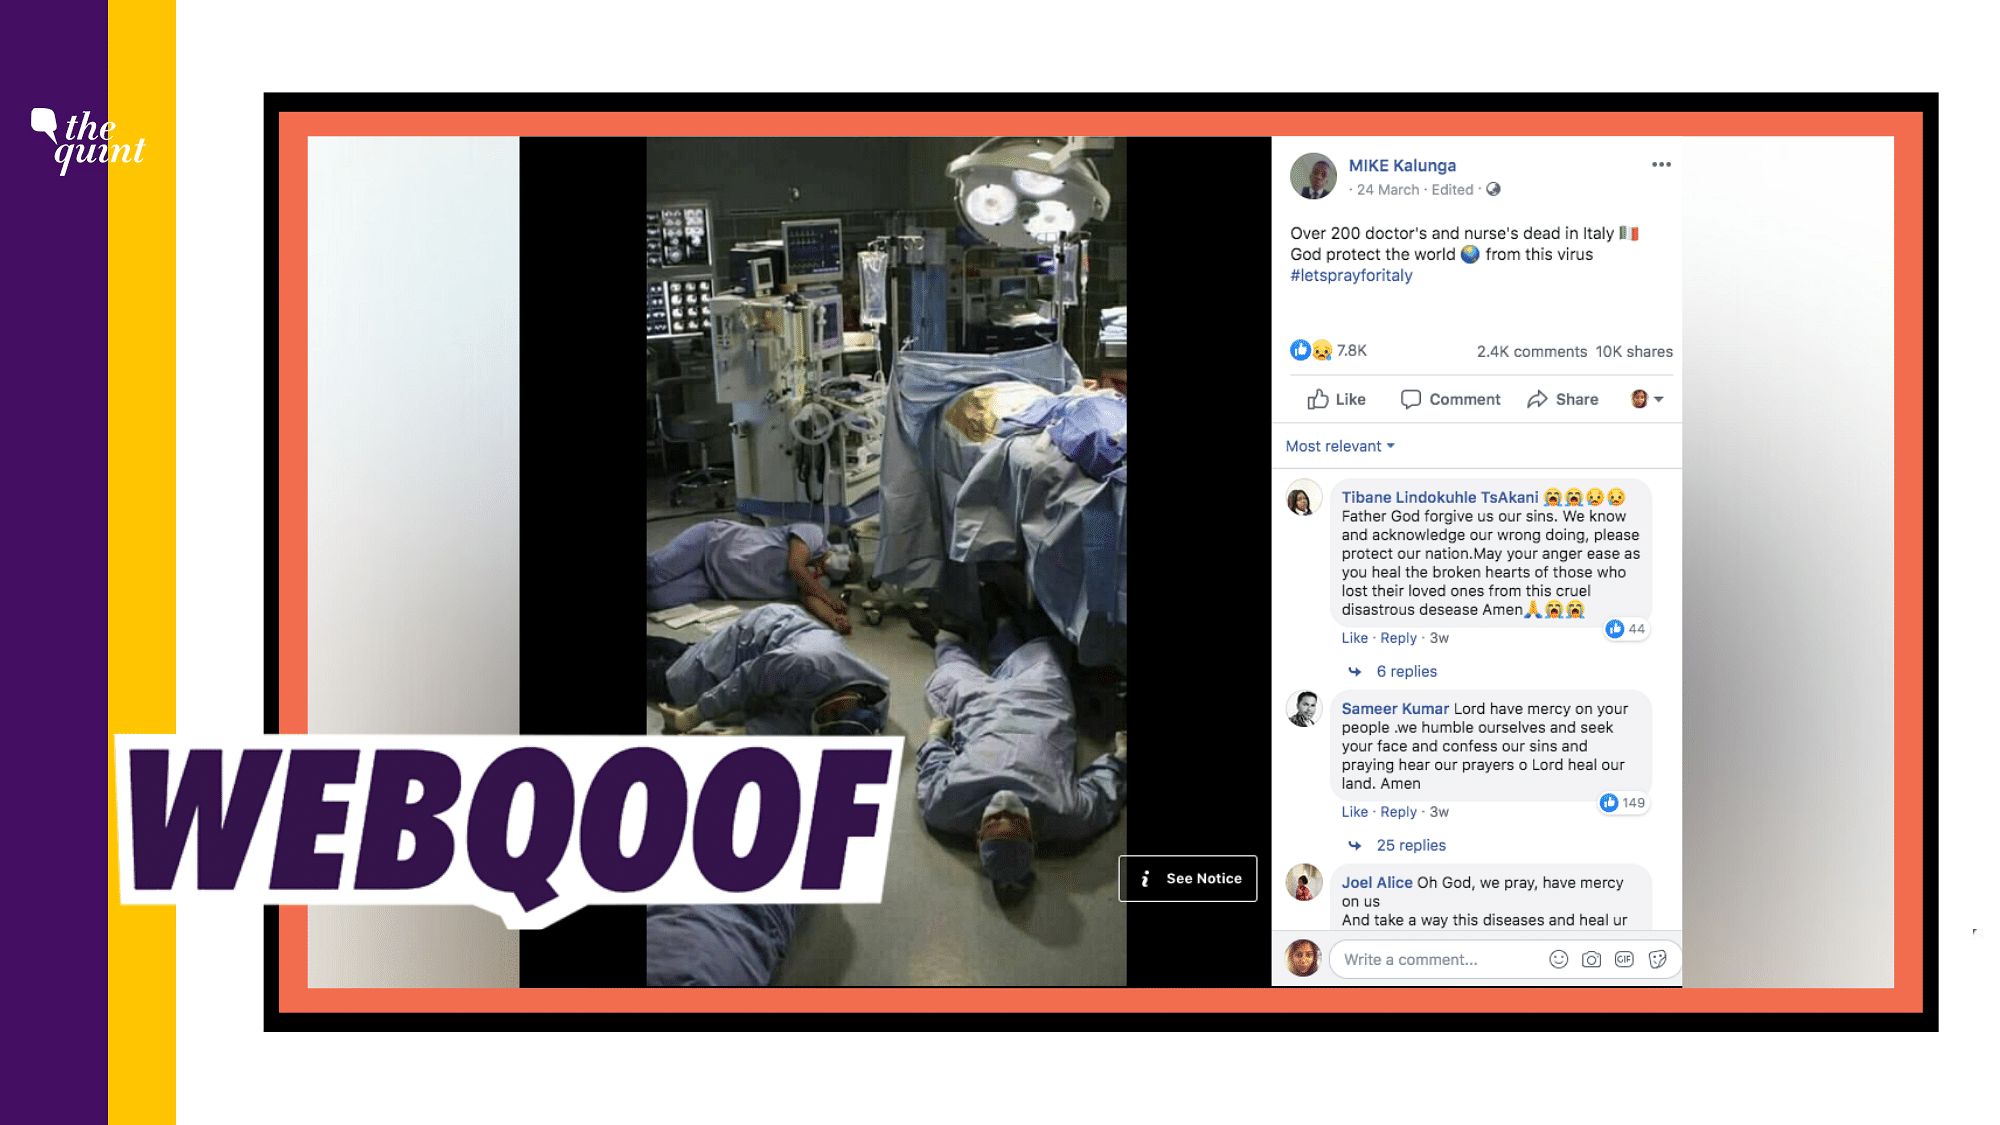 A photo of some doctors and/or nurses lying seemingly dead in what appears to be a hospital operation theatre is going viral with the claim that over 200 doctors and nurses have died in Italy owing to coronavirus.